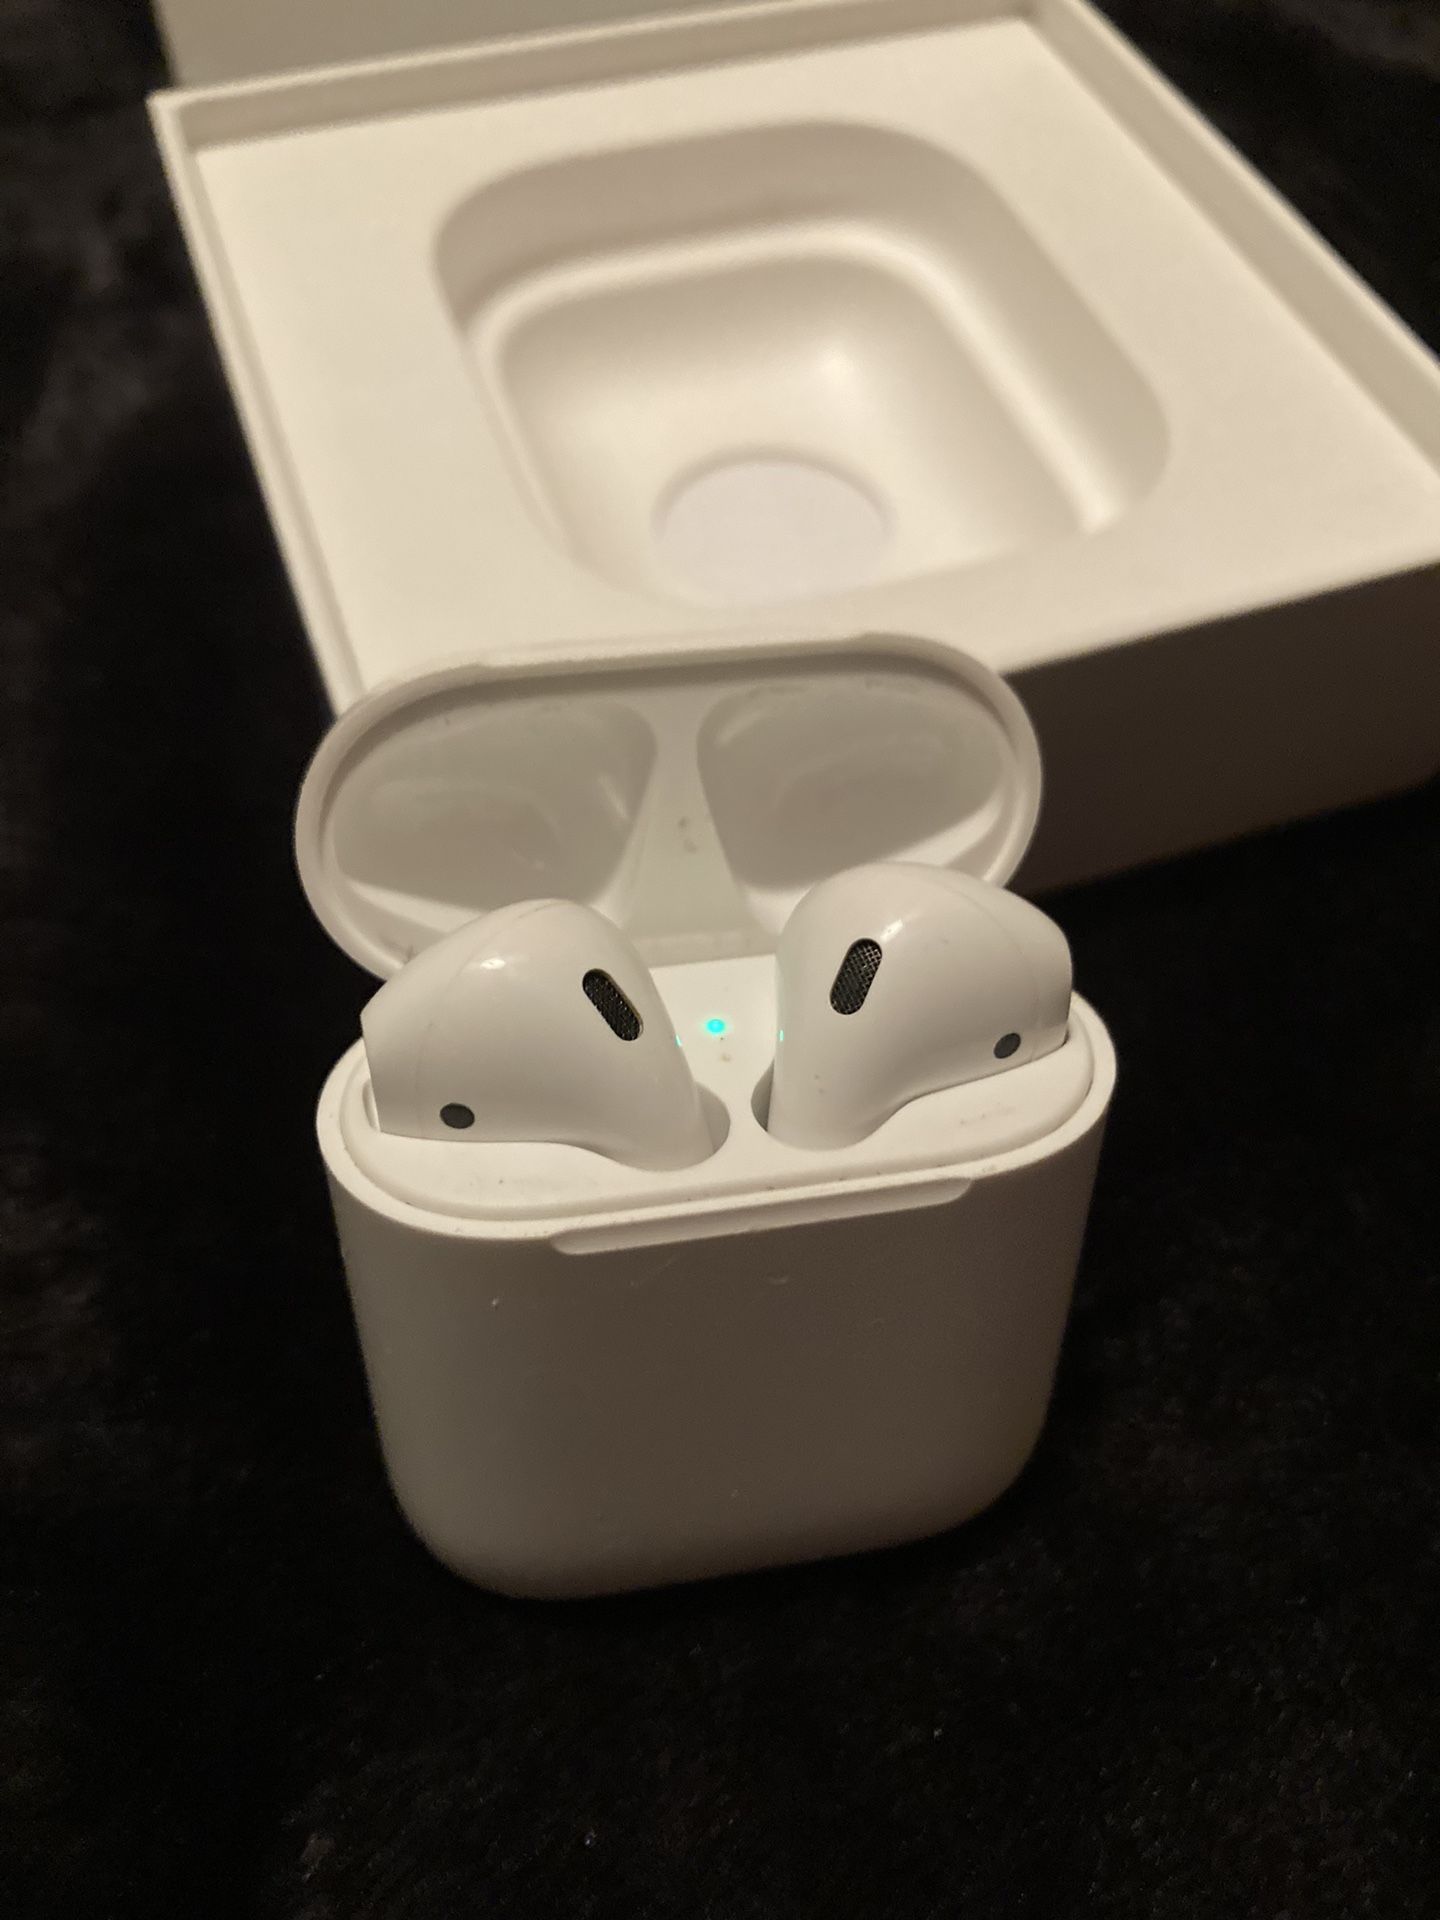 Apple Airpods w/ Charging Case.